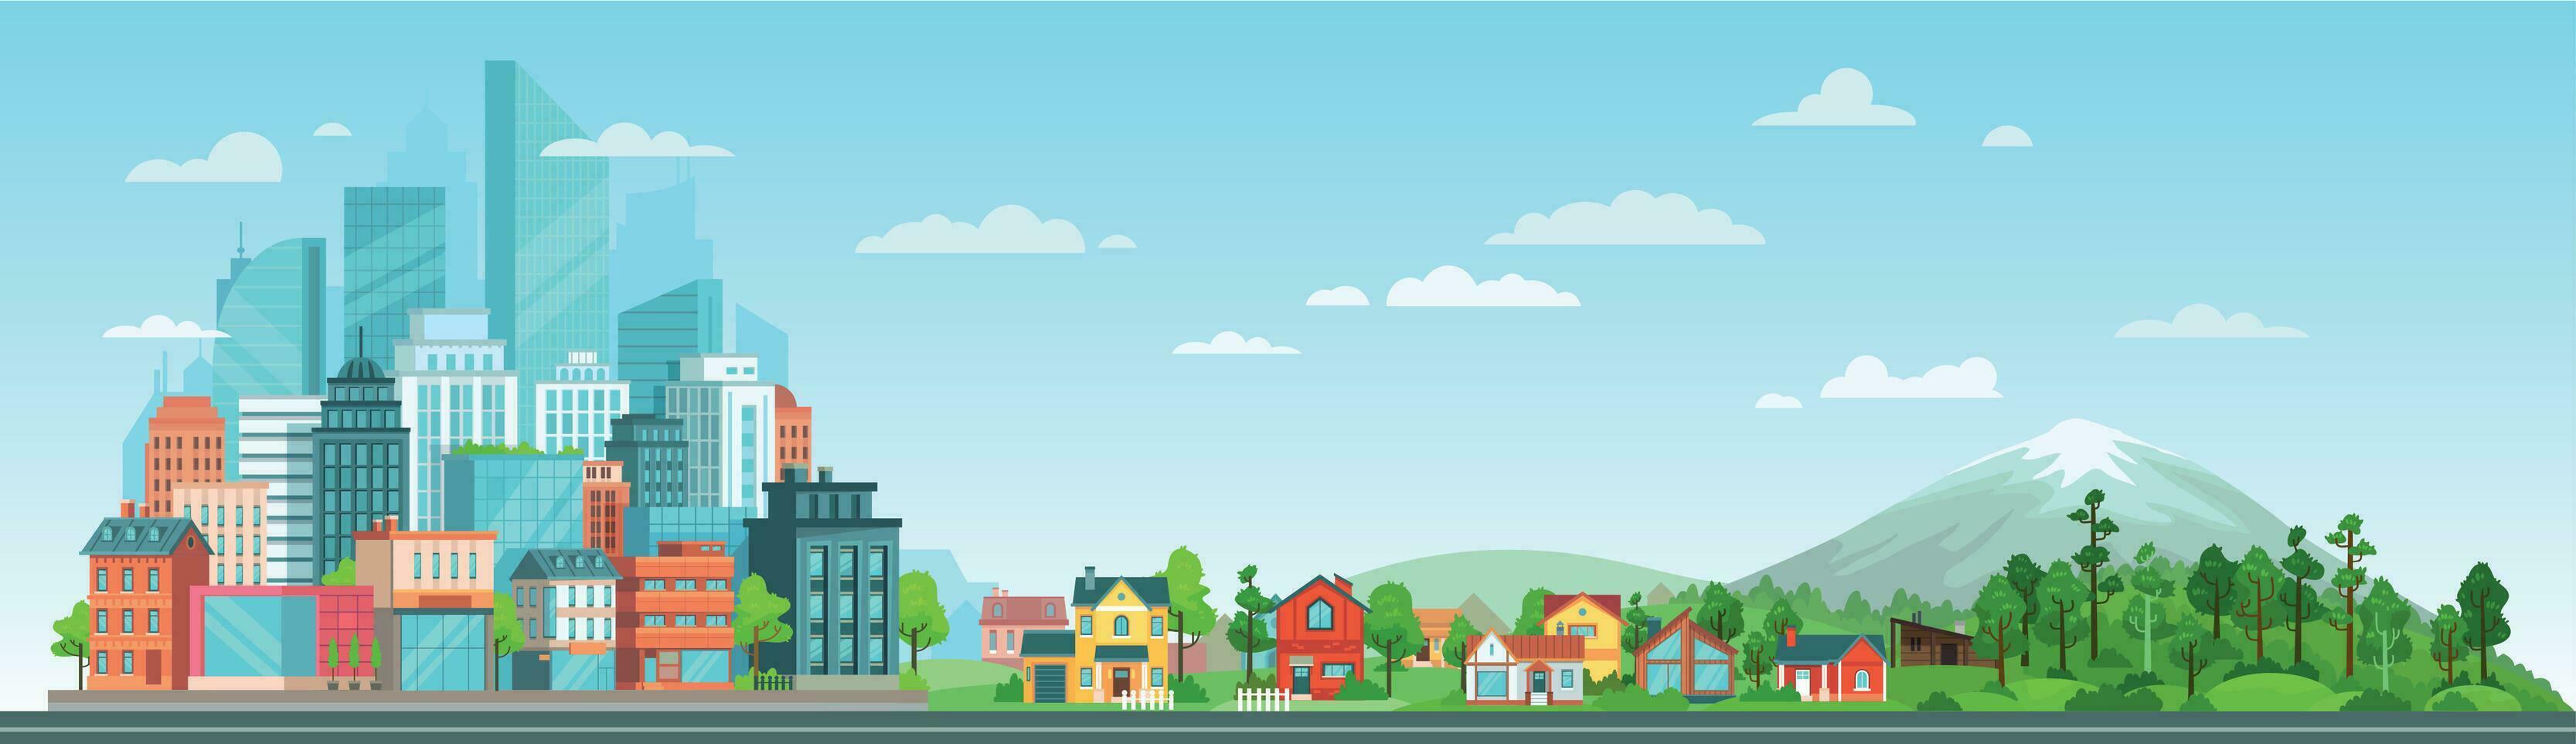 Urban and nature landscape. Modern city buildings, suburban houses and wild forest vector illustration. Contemporary metropolis with skyscrapers, suburbs with cottages and woods composition